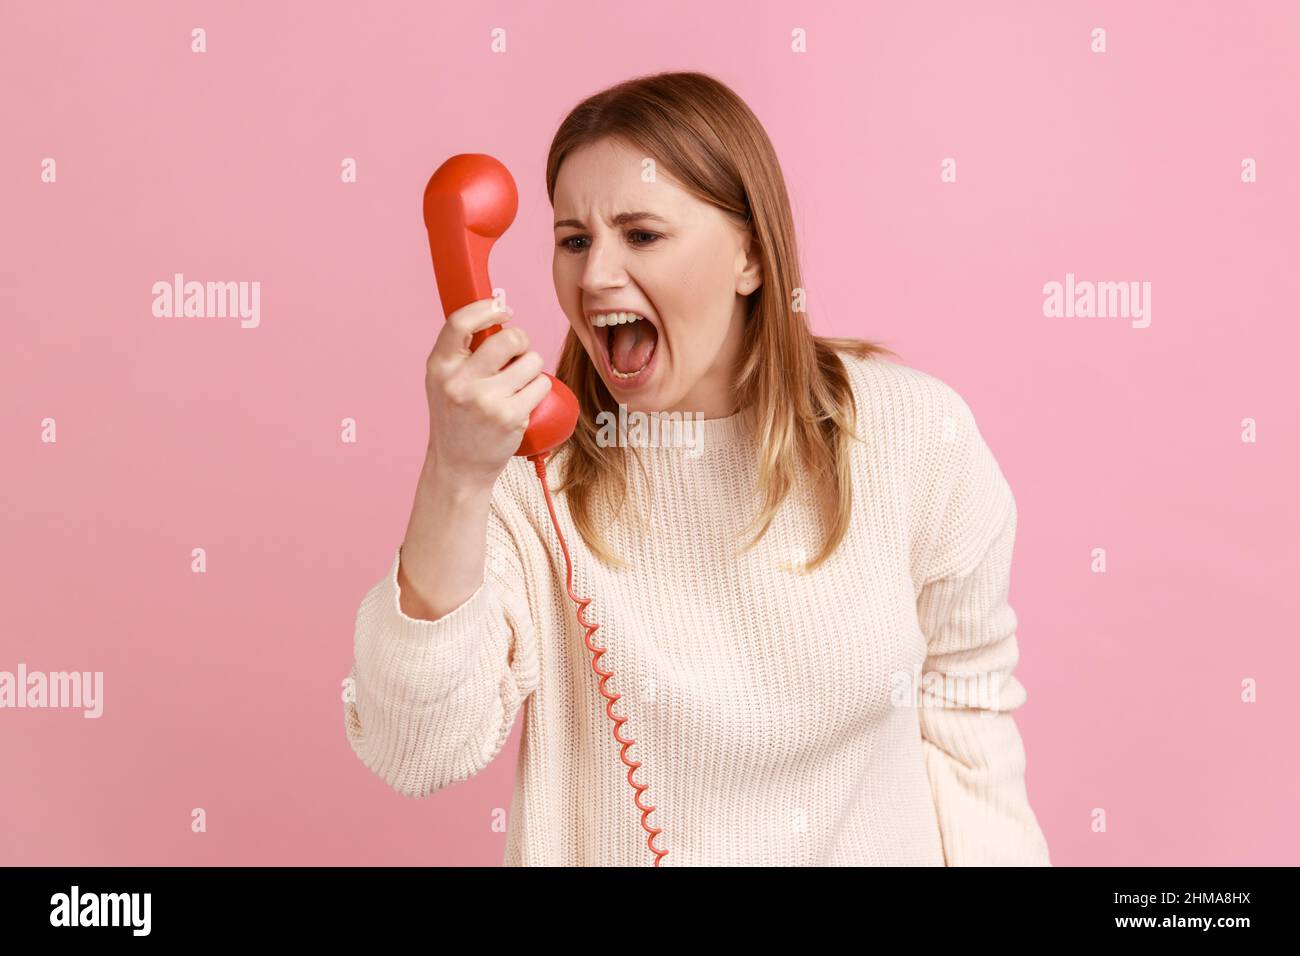 Portrait of angry upset blond woman screaming into red handset, having unpleasant conversation, expressing aggression, wearing white sweater. Indoor studio shot isolated on pink background. Stock Photo